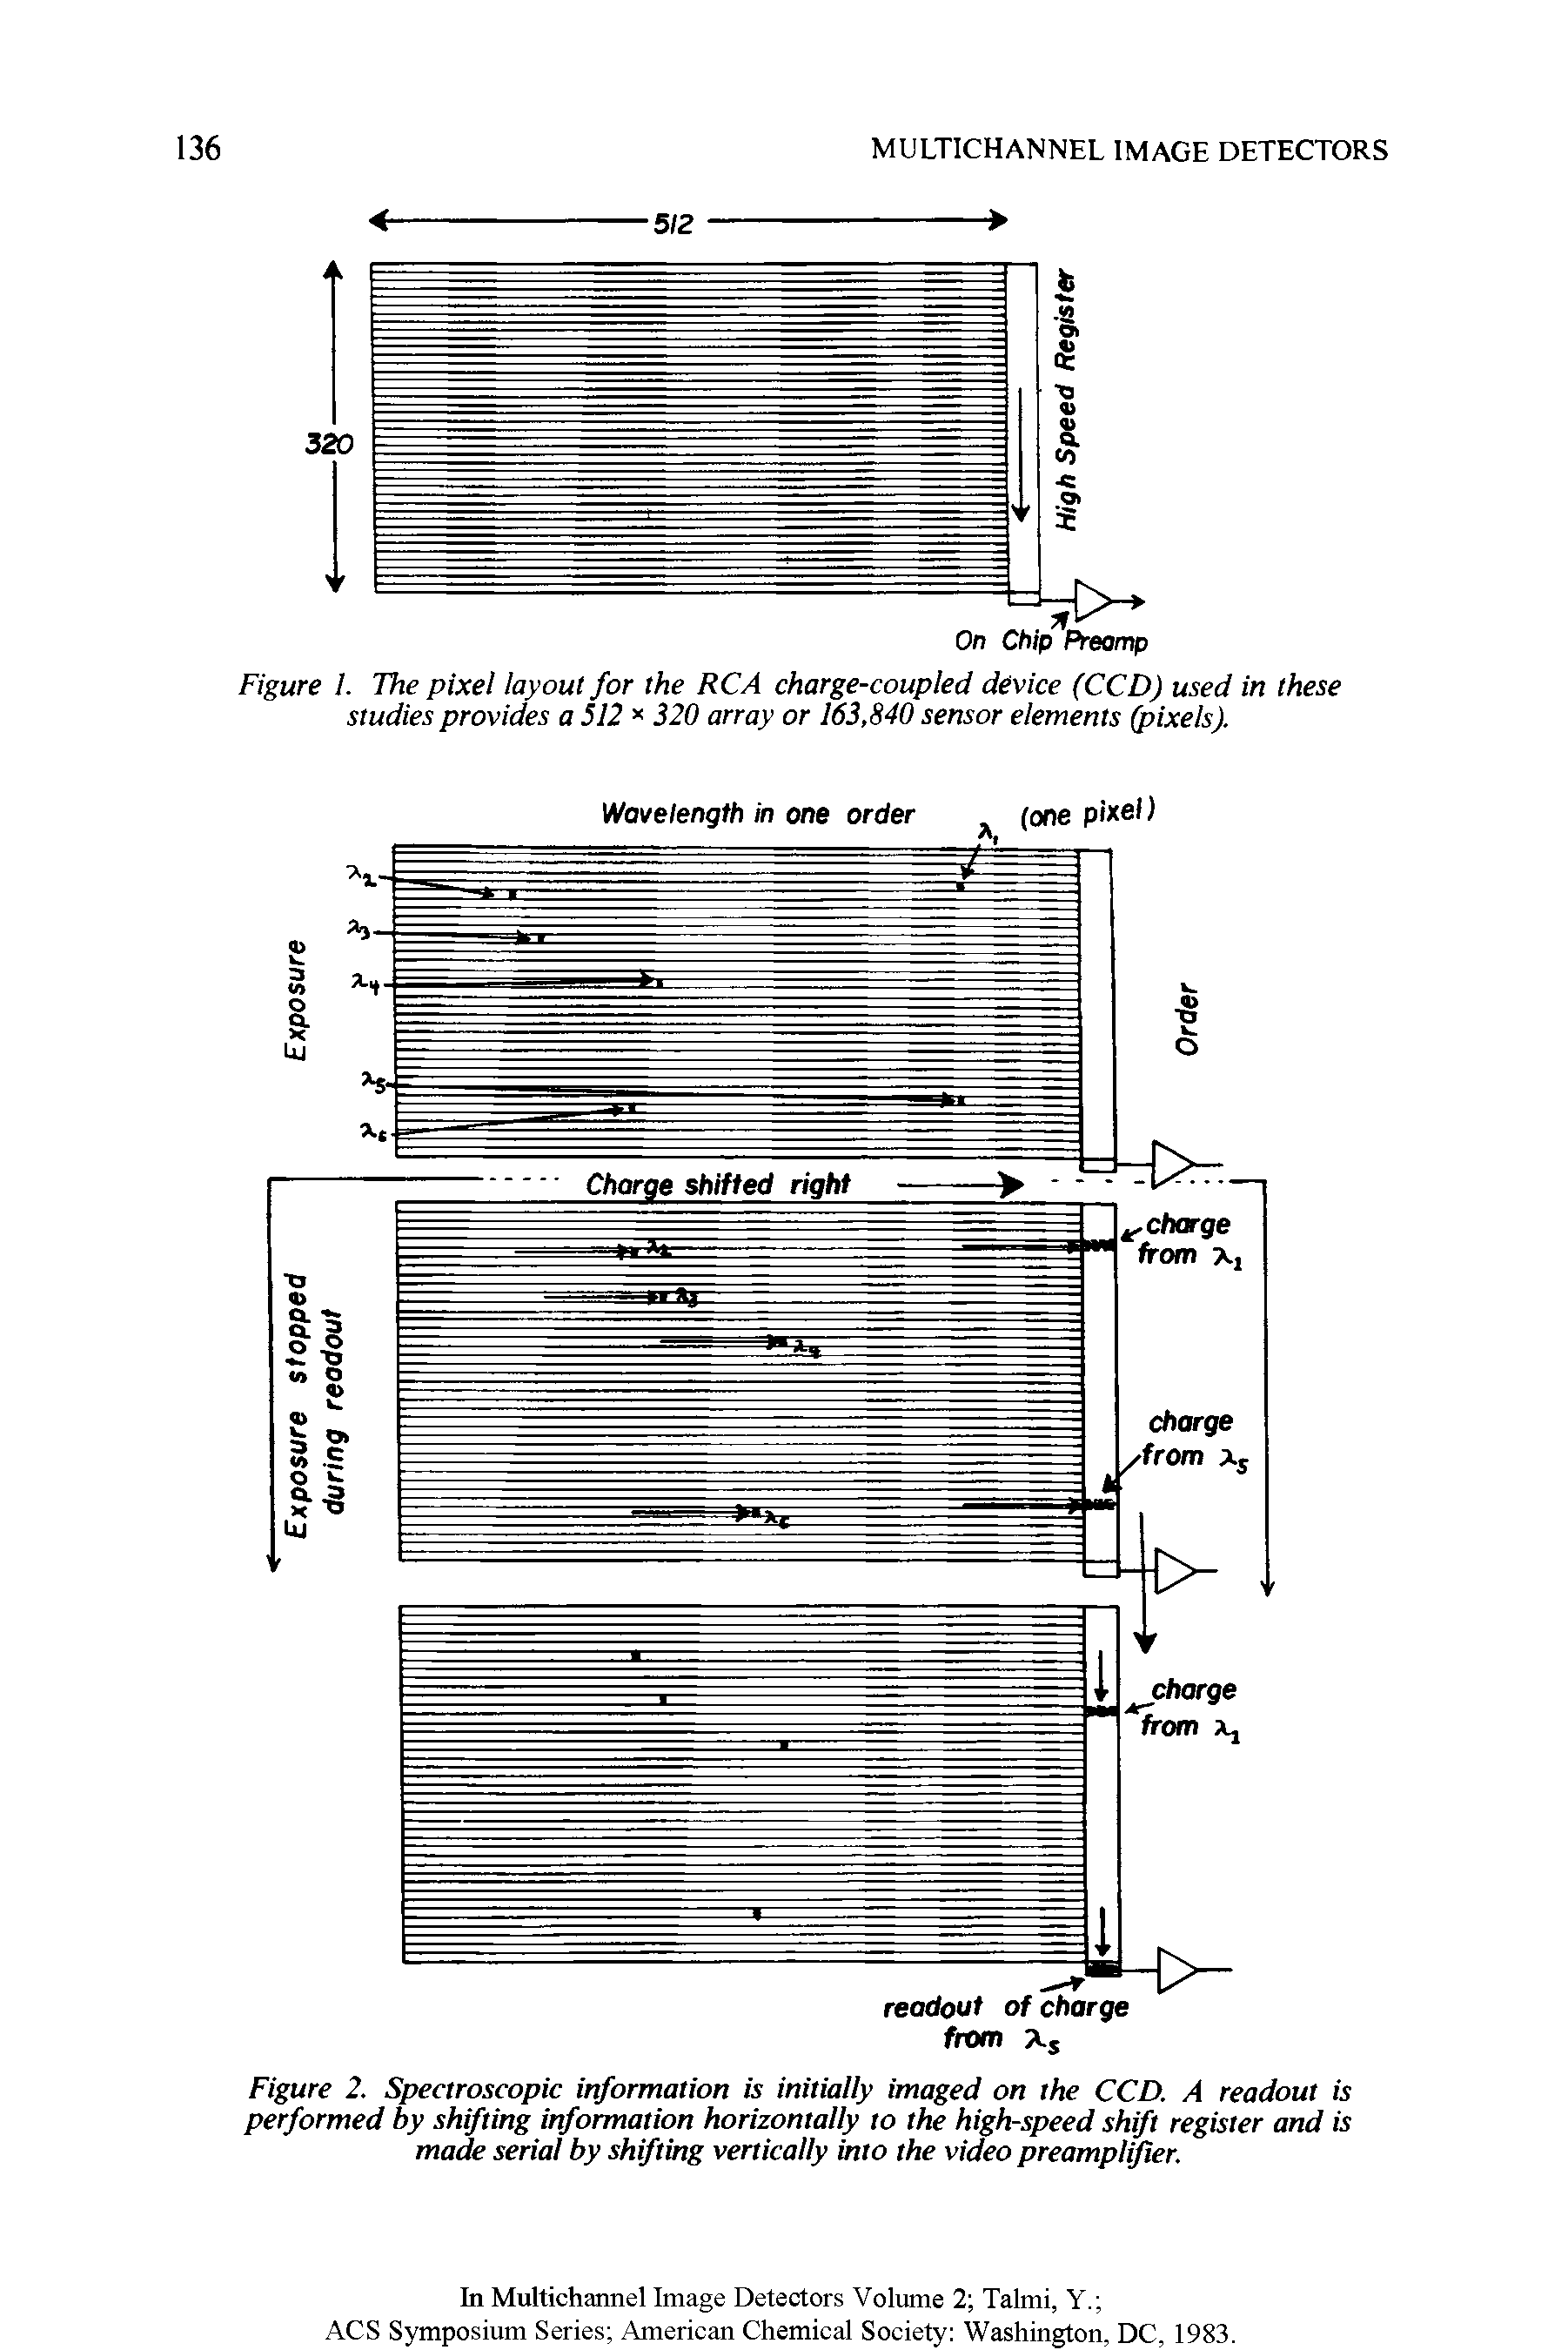 Figure 1. The pixel layout for the RCA charge-coupled device (CCD) used in these studies provides a 512 320 array or 163,840 sensor elements (pixels).